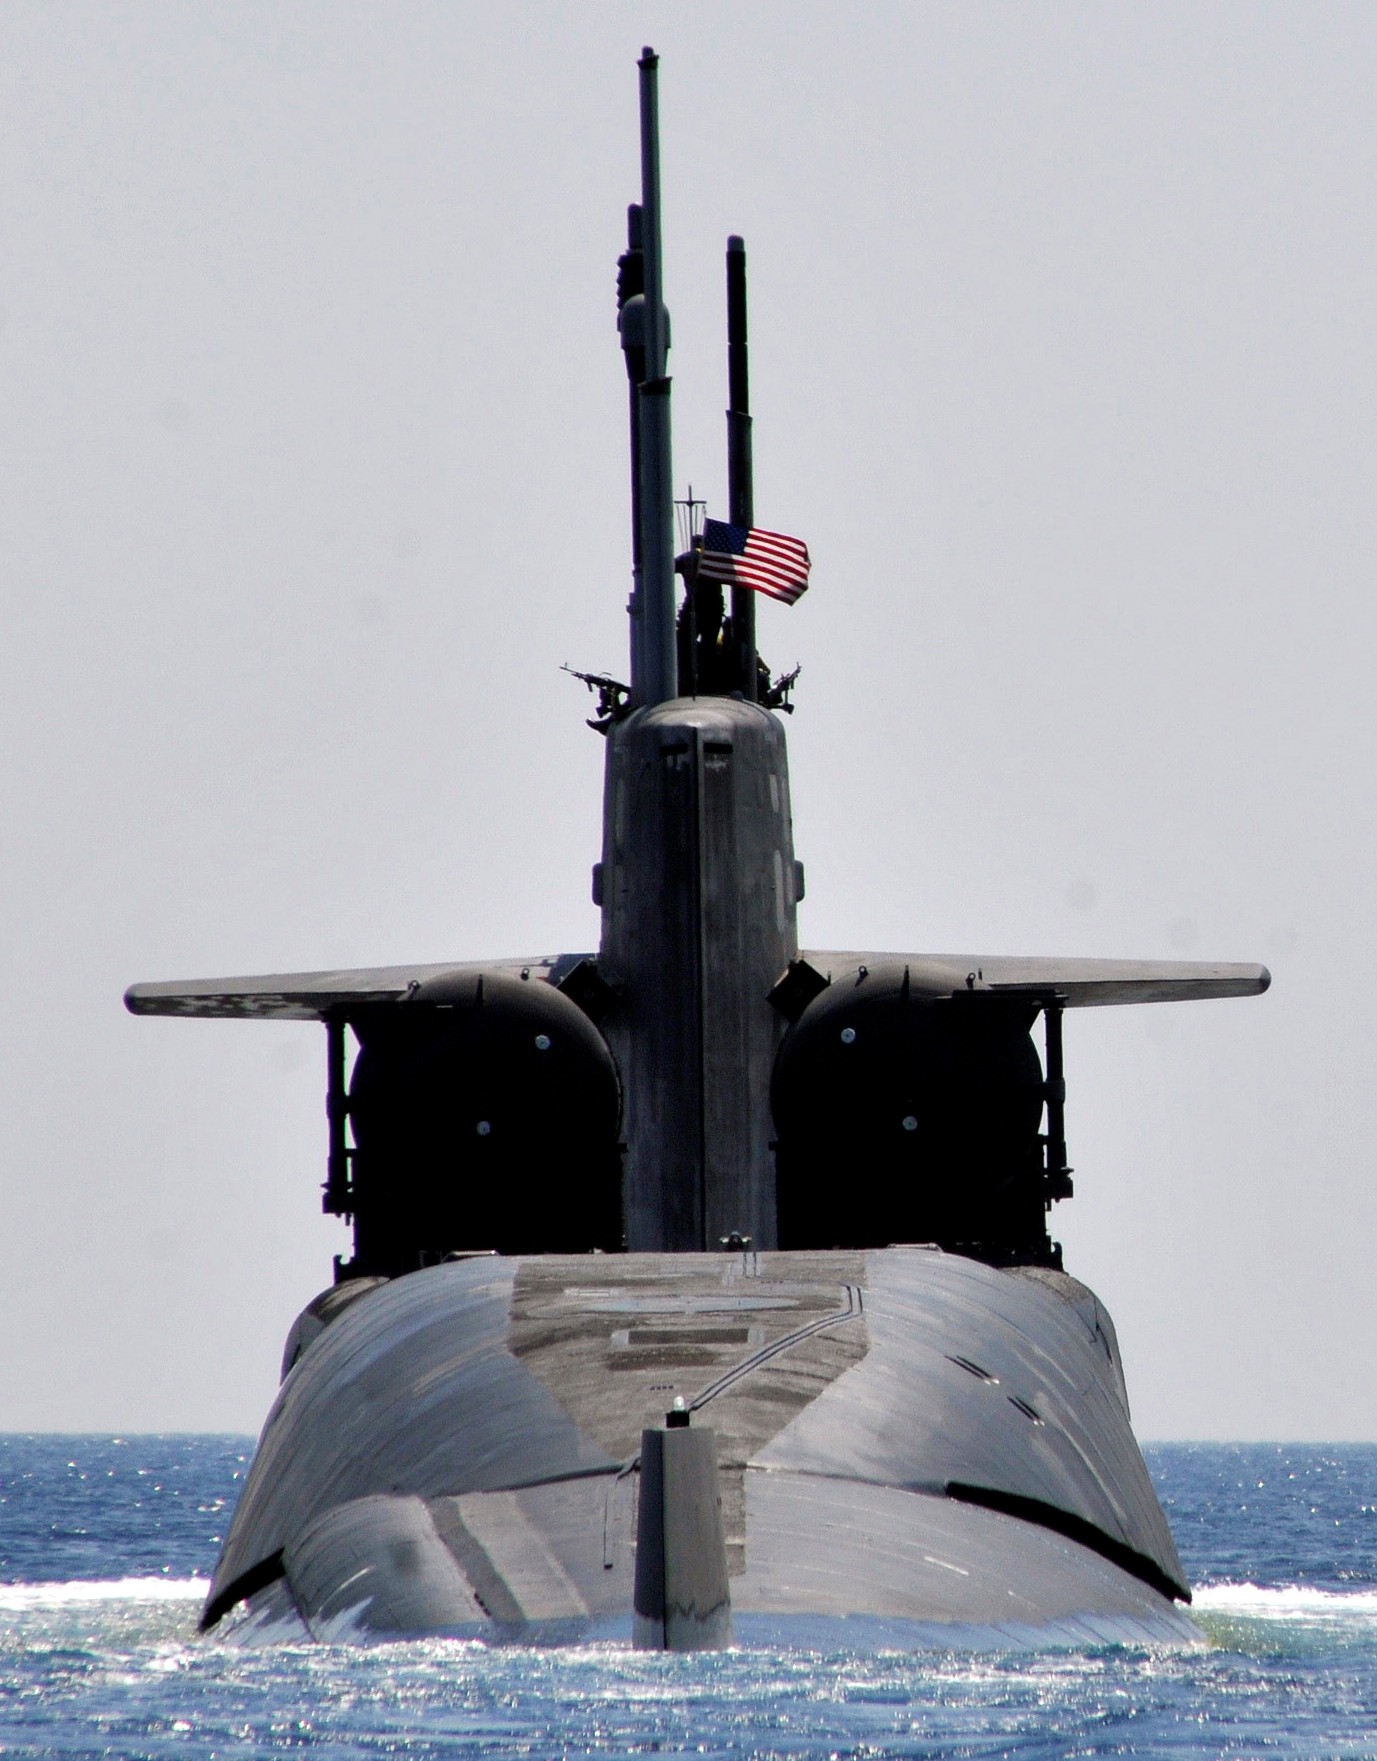 ssgn-728 uss florida guided missile submarine us navy 2012 20